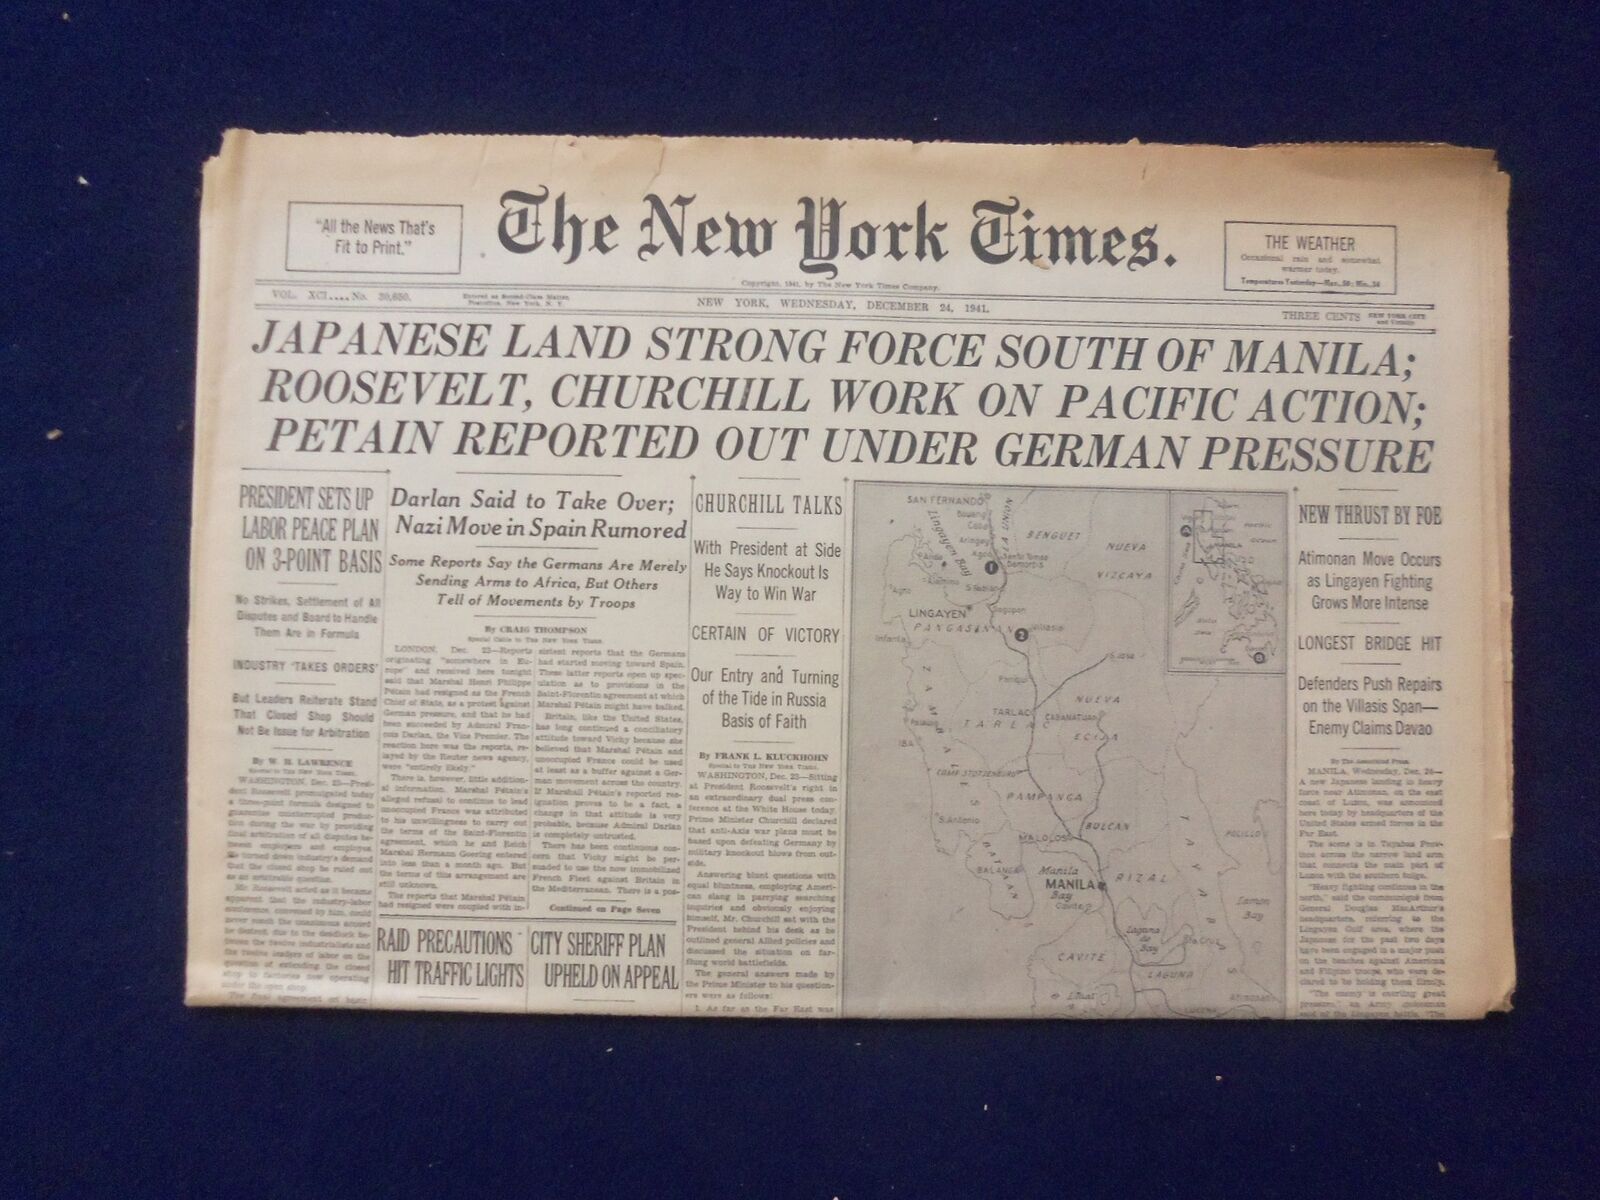 1941 DEC 24 NEW YORK TIMES - JAPANESE LAND STRONG FORCE SOUTH OF MANILA- NP 6489